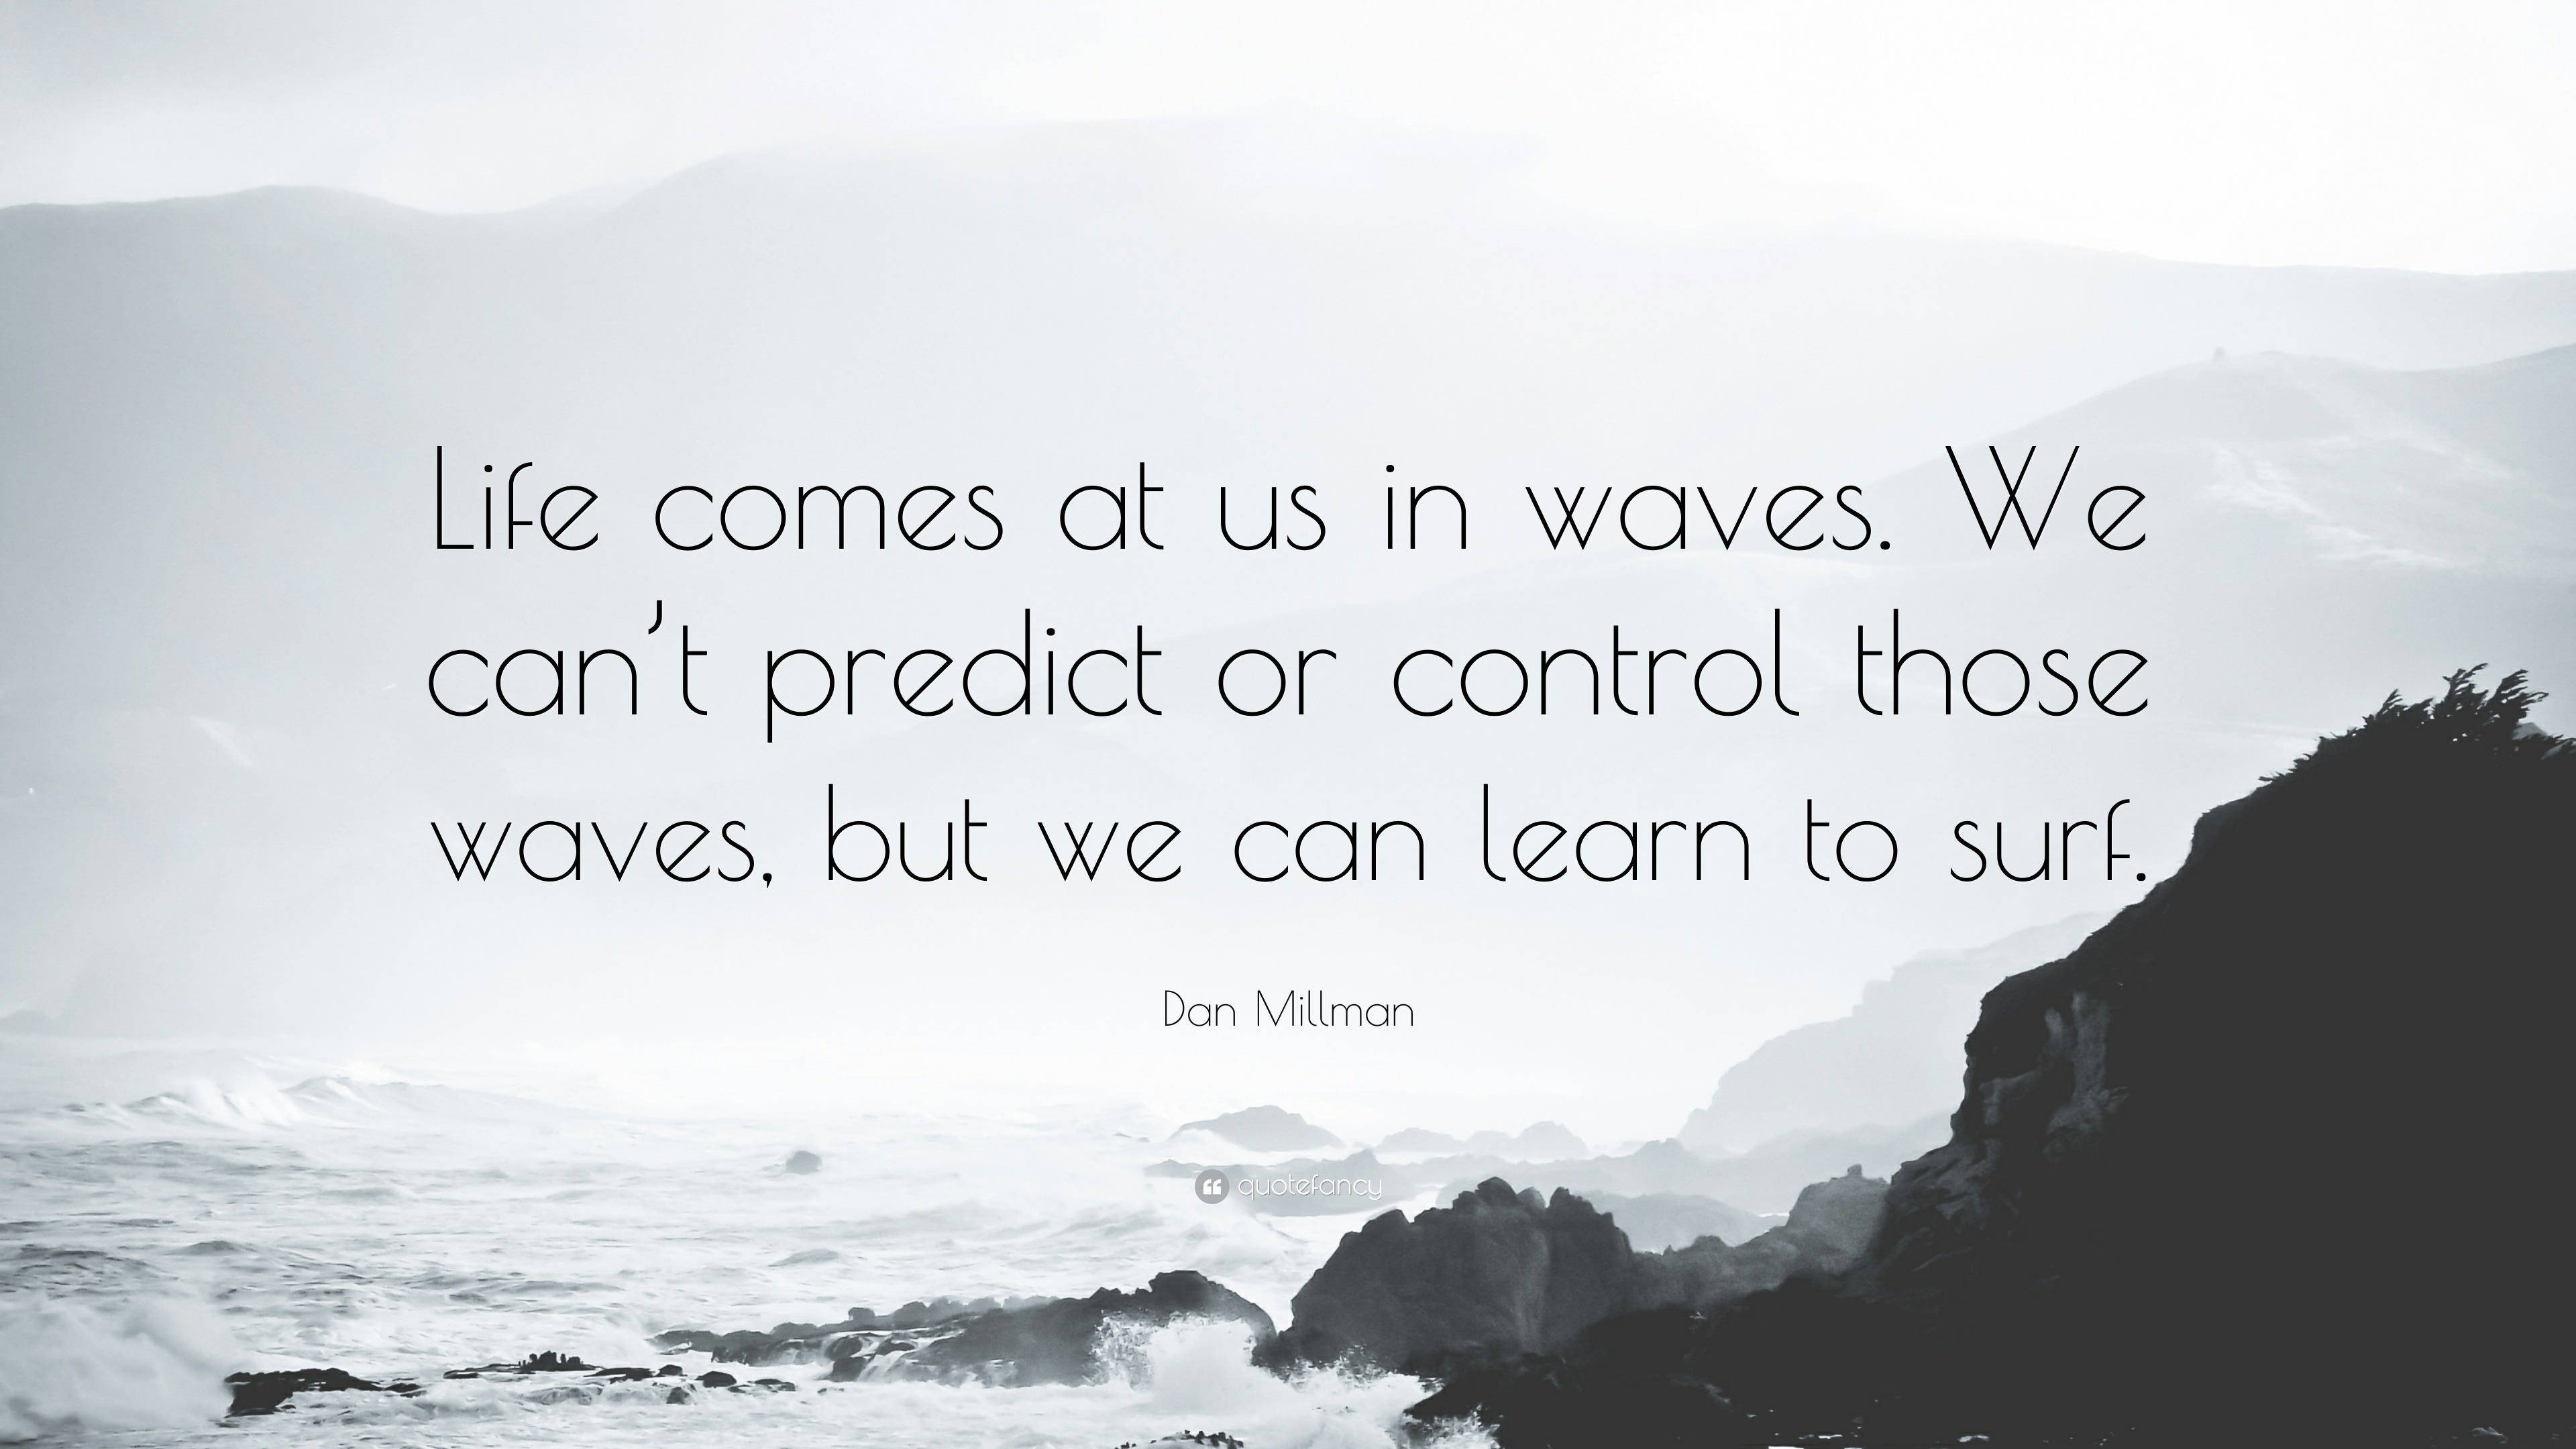 Dan Millman Quote: “Life comes at us in waves. We can't predict or control  those